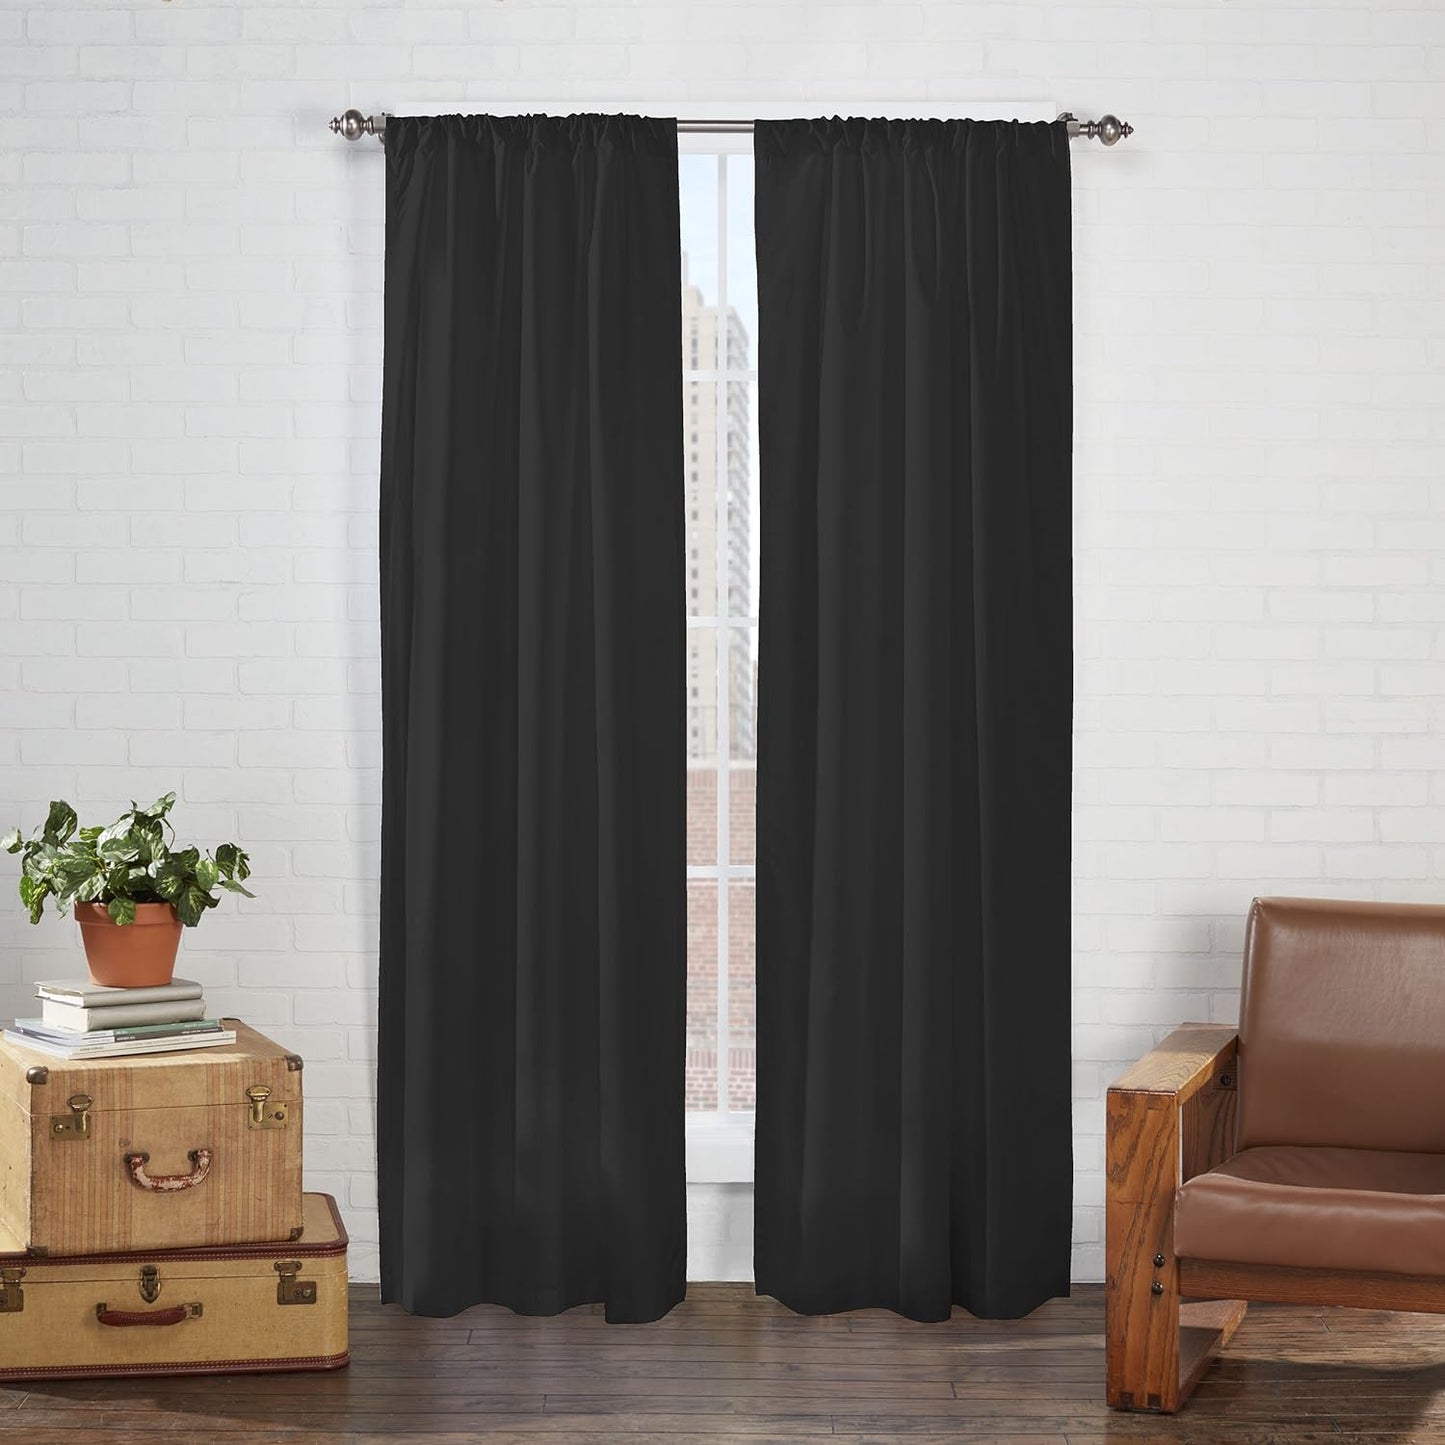 Pairs to Go Cadenza Modern Decorative Rod Pocket Window Curtains for Living Room (2 Panels), 40 in X 84 In, Teal  Keeco LLC Black 40 In X 54 In 